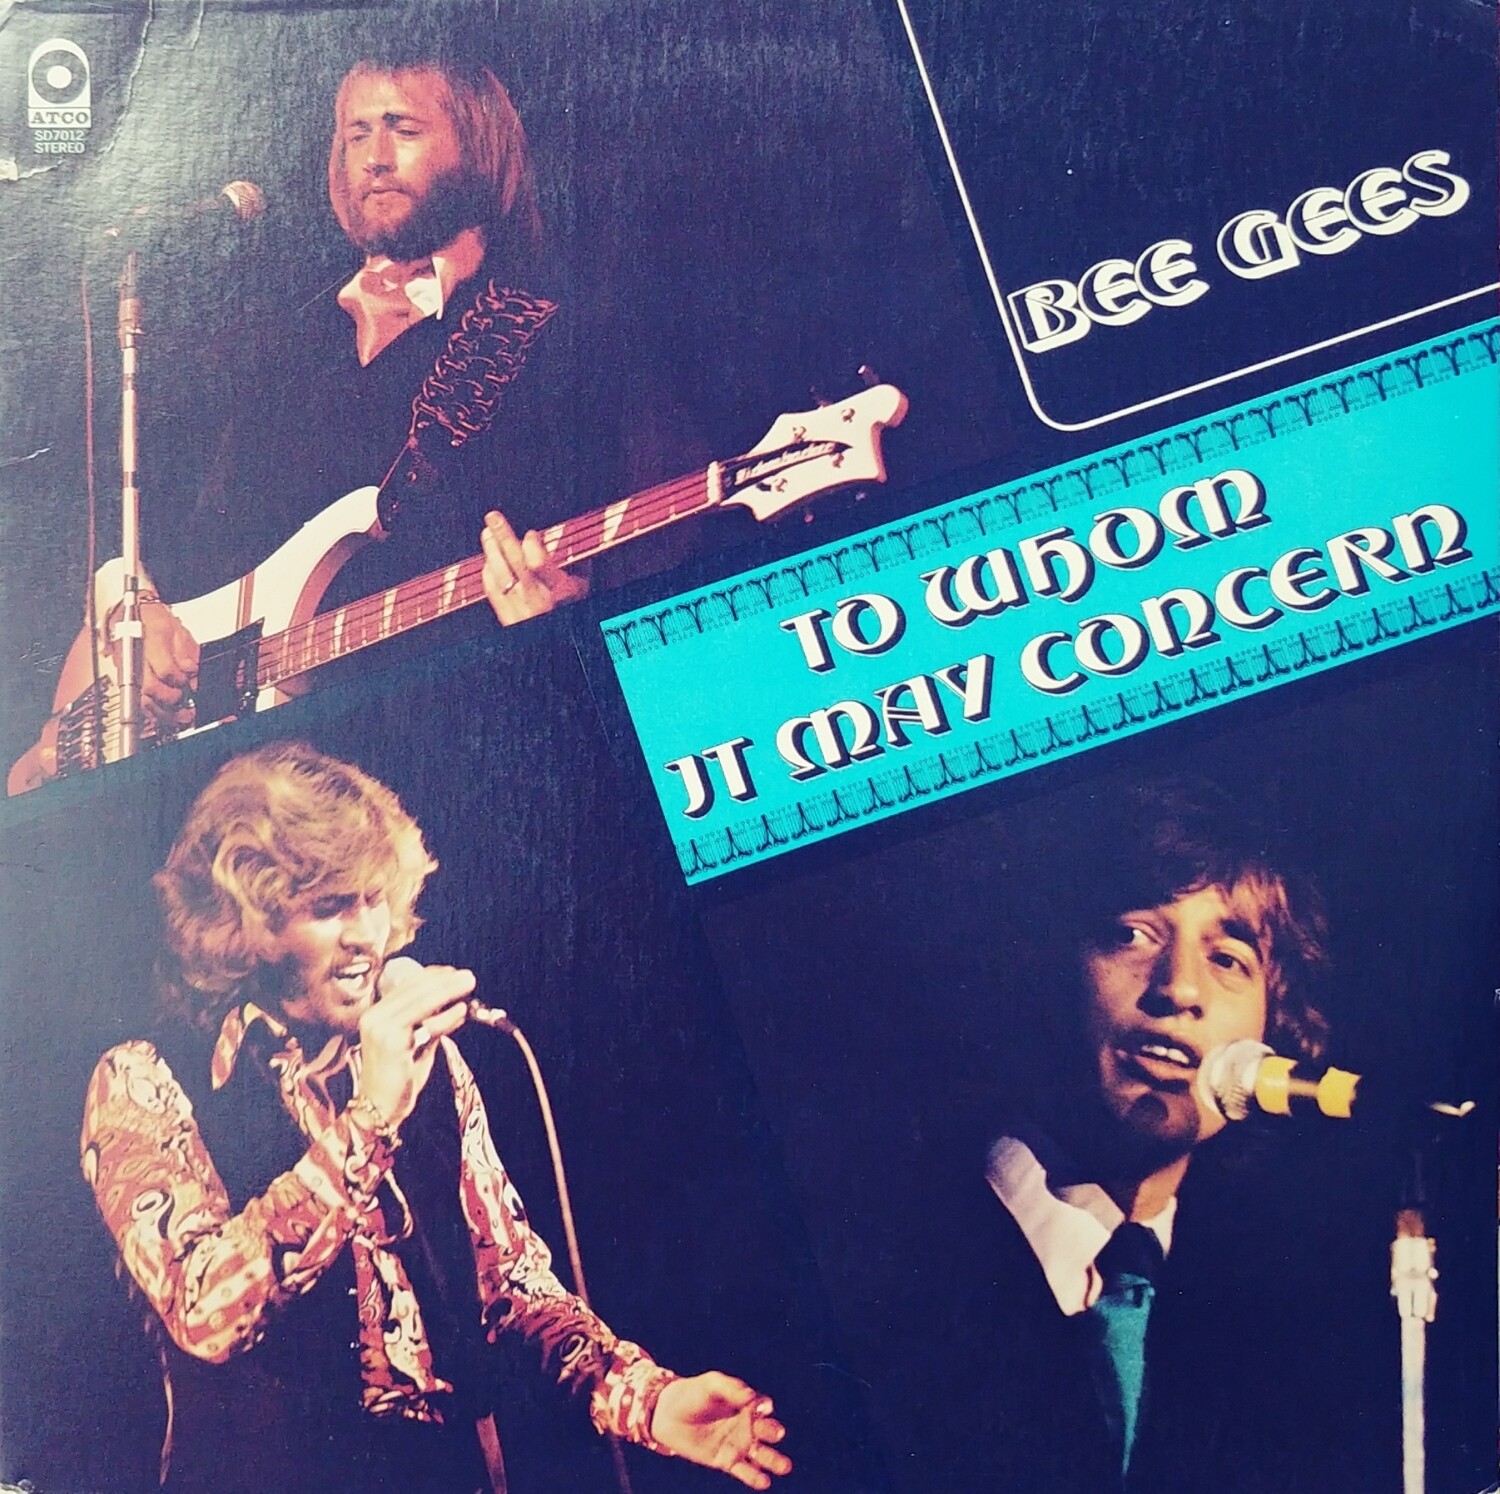 Bee Gees - To whom it may concern